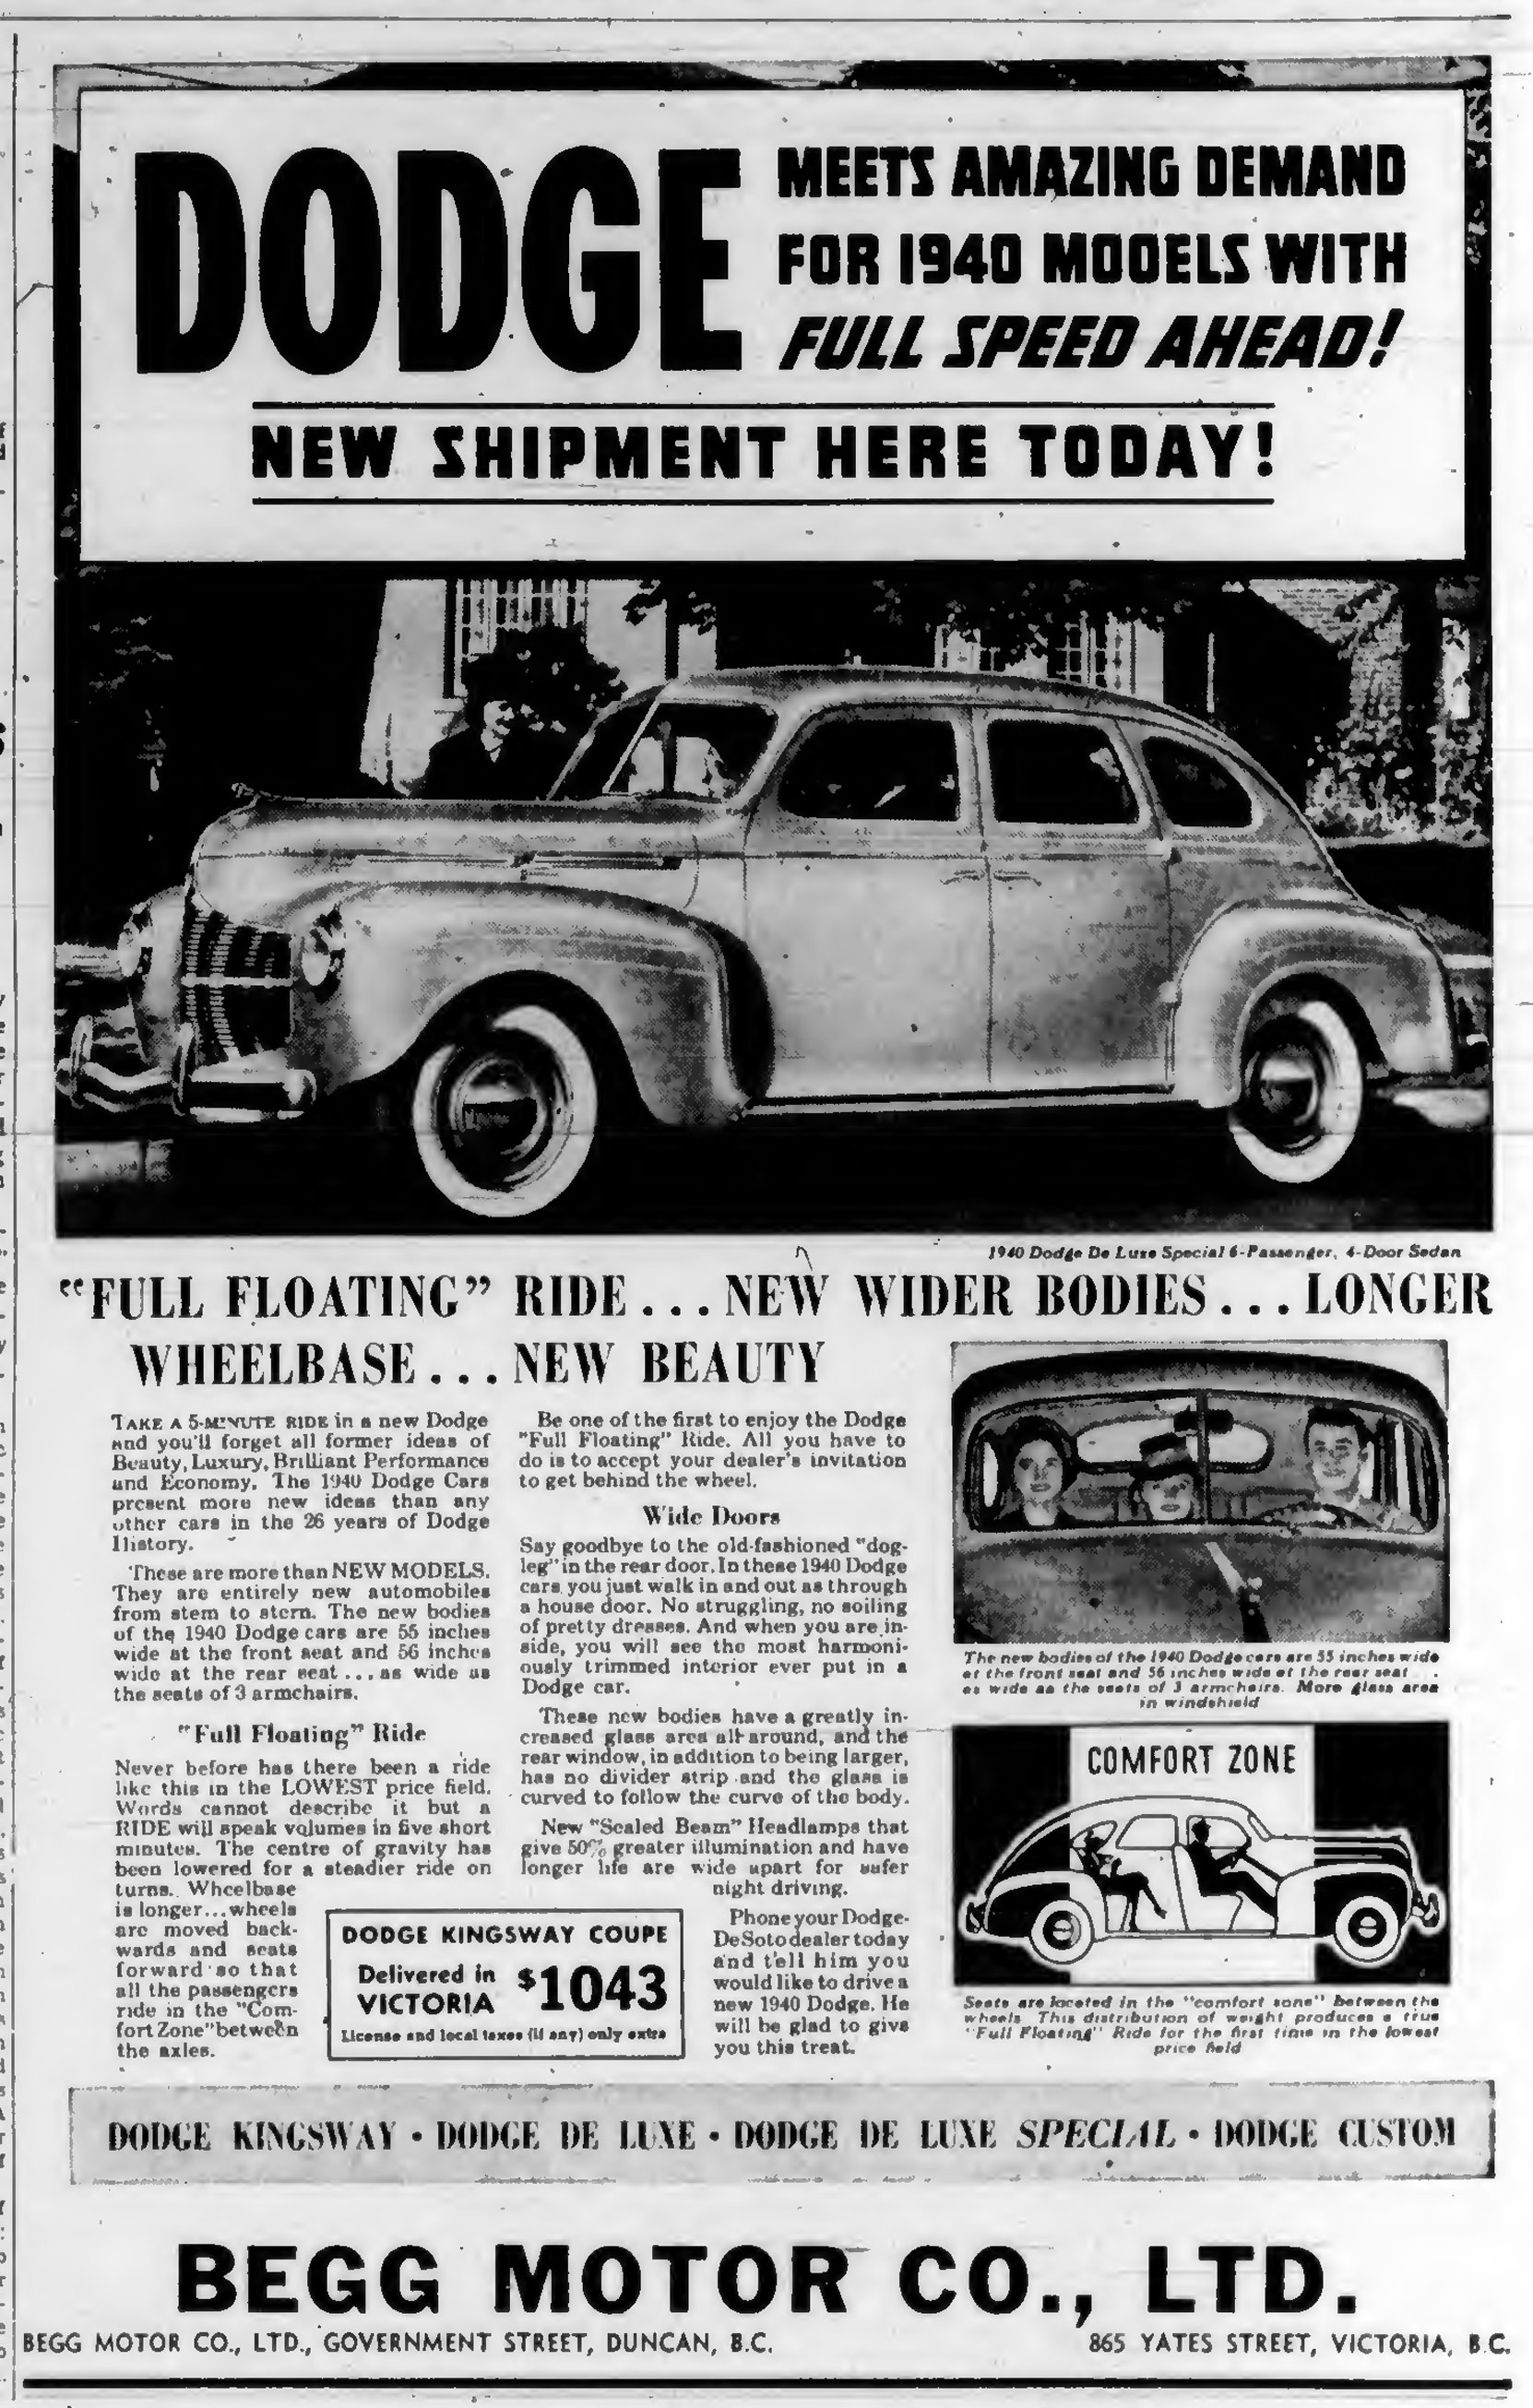 1940 advertisement for Dodge, sold by Begg Motor Company, 865 Yates Street, Victoria and on Government Street in Duncan.